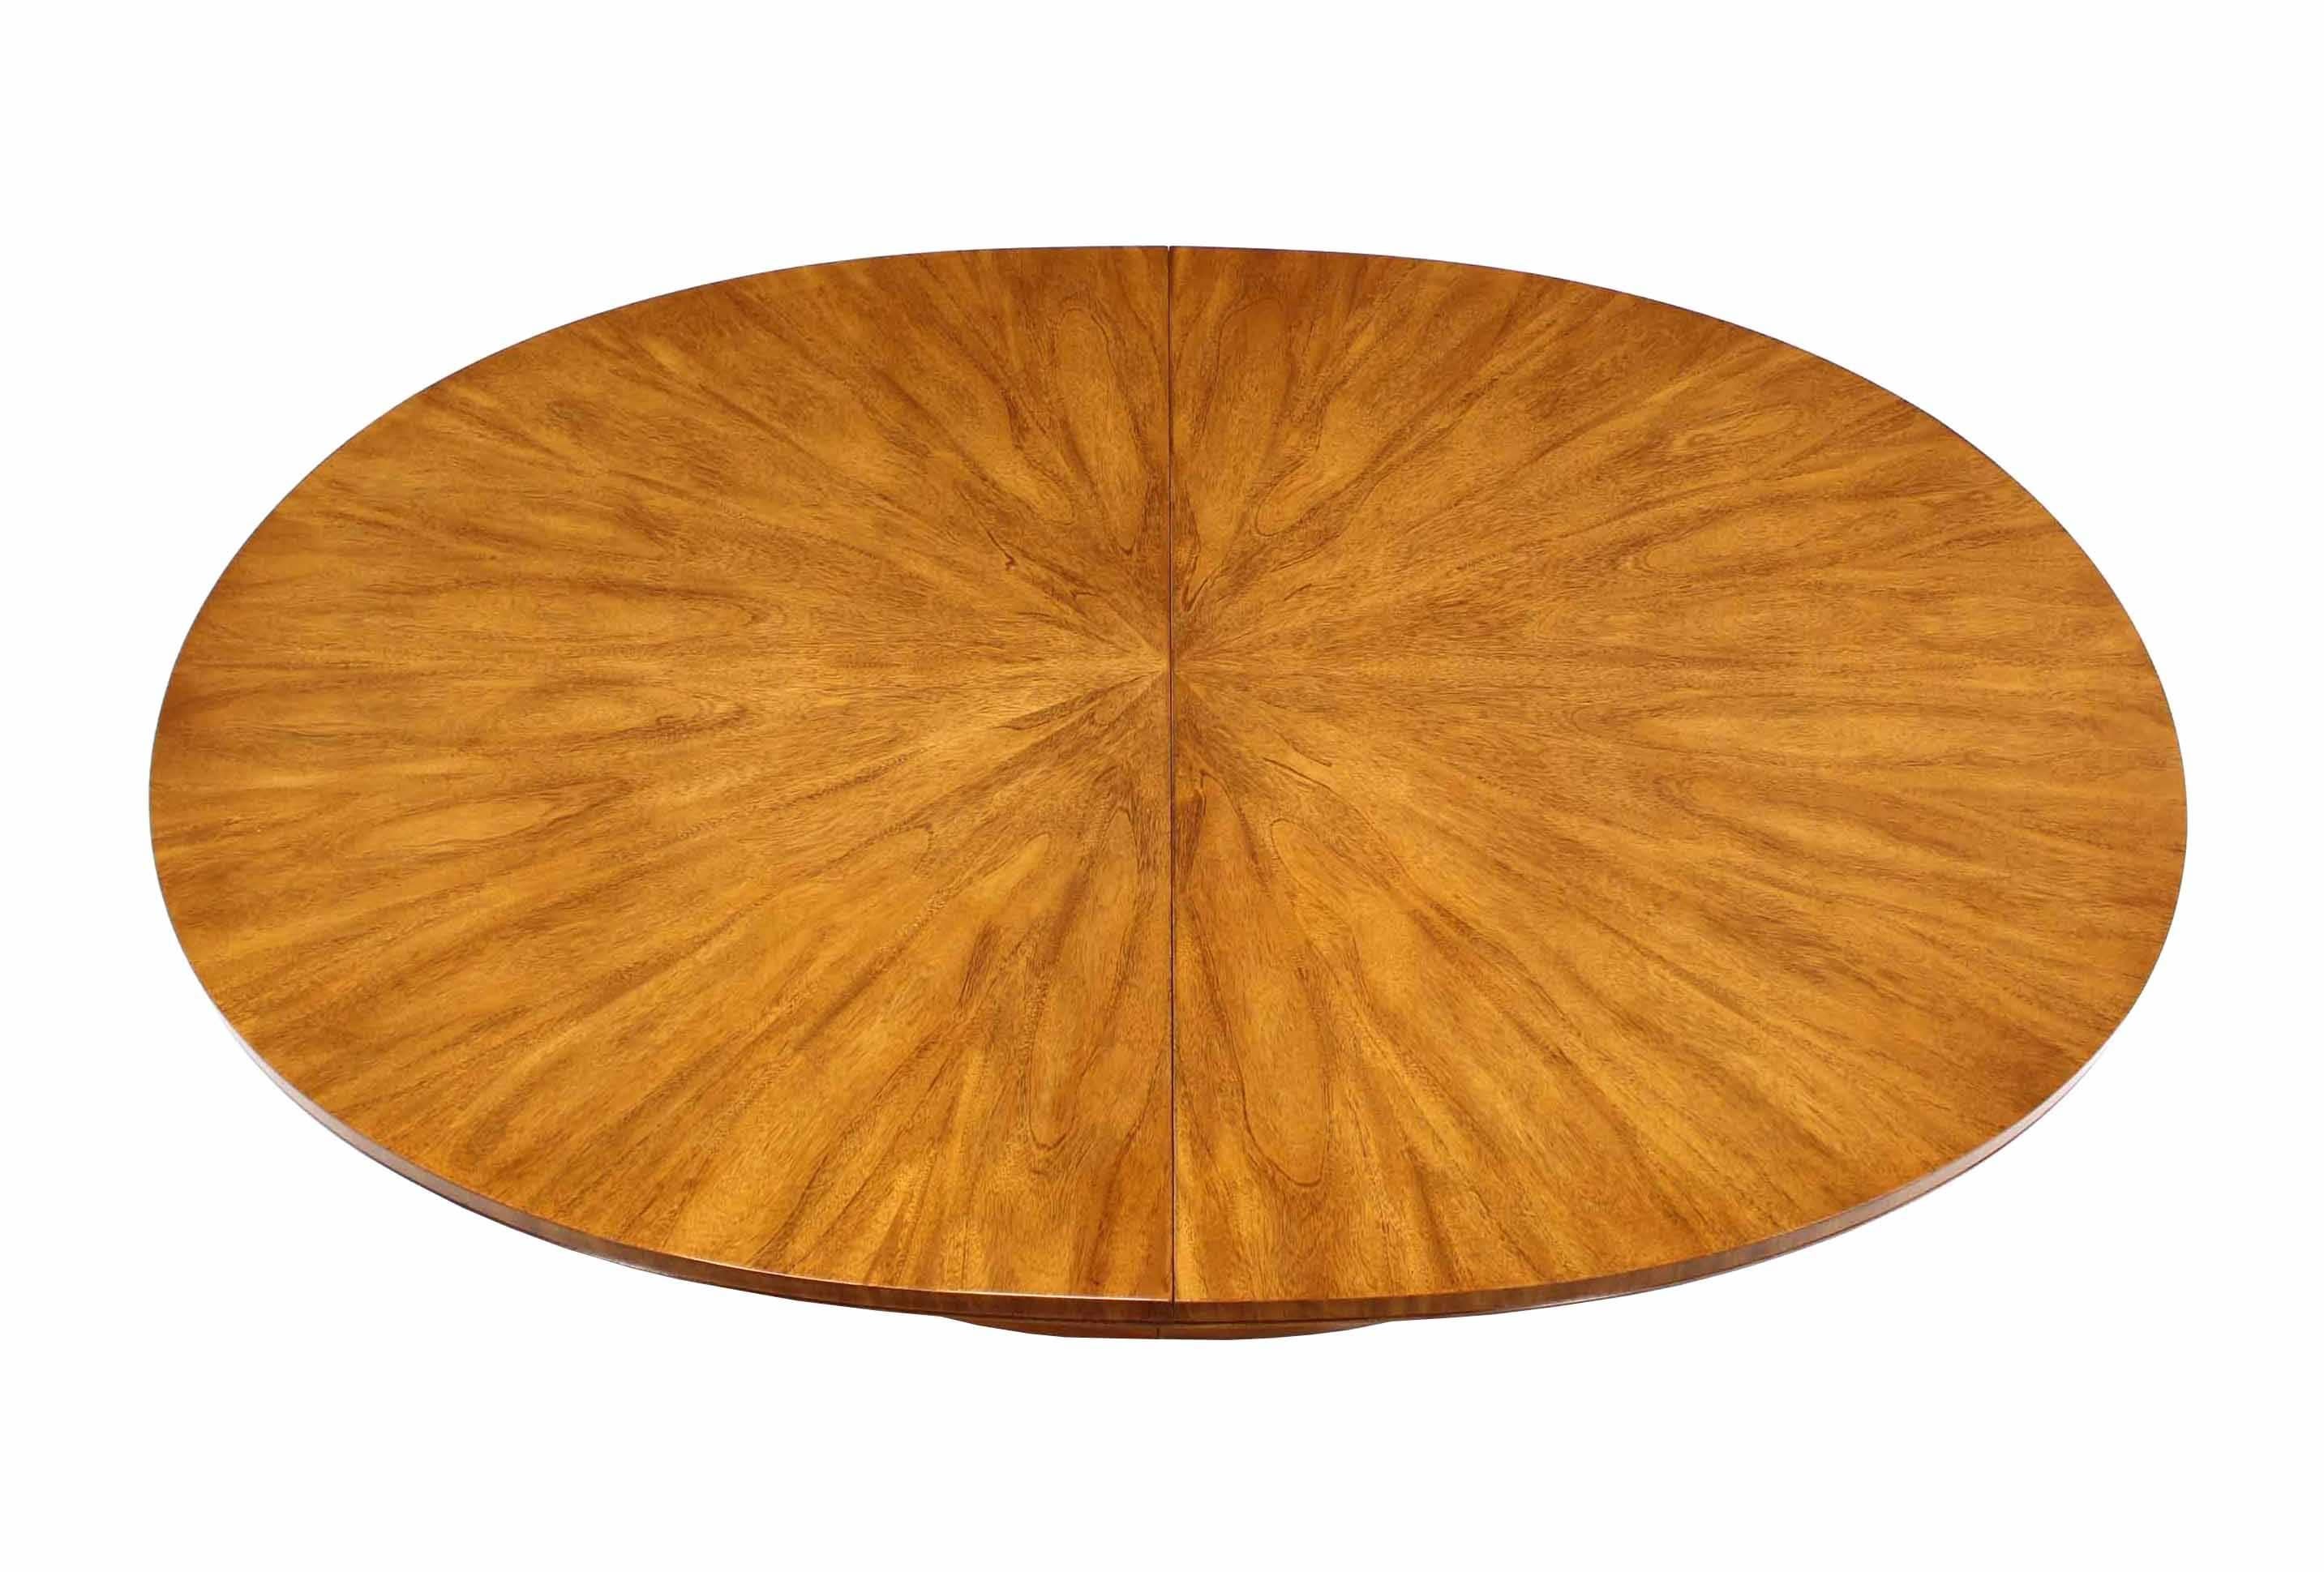 20th Century Oval Dining Satinwood Table by Drexel w/ Two Extension Boards Leafs